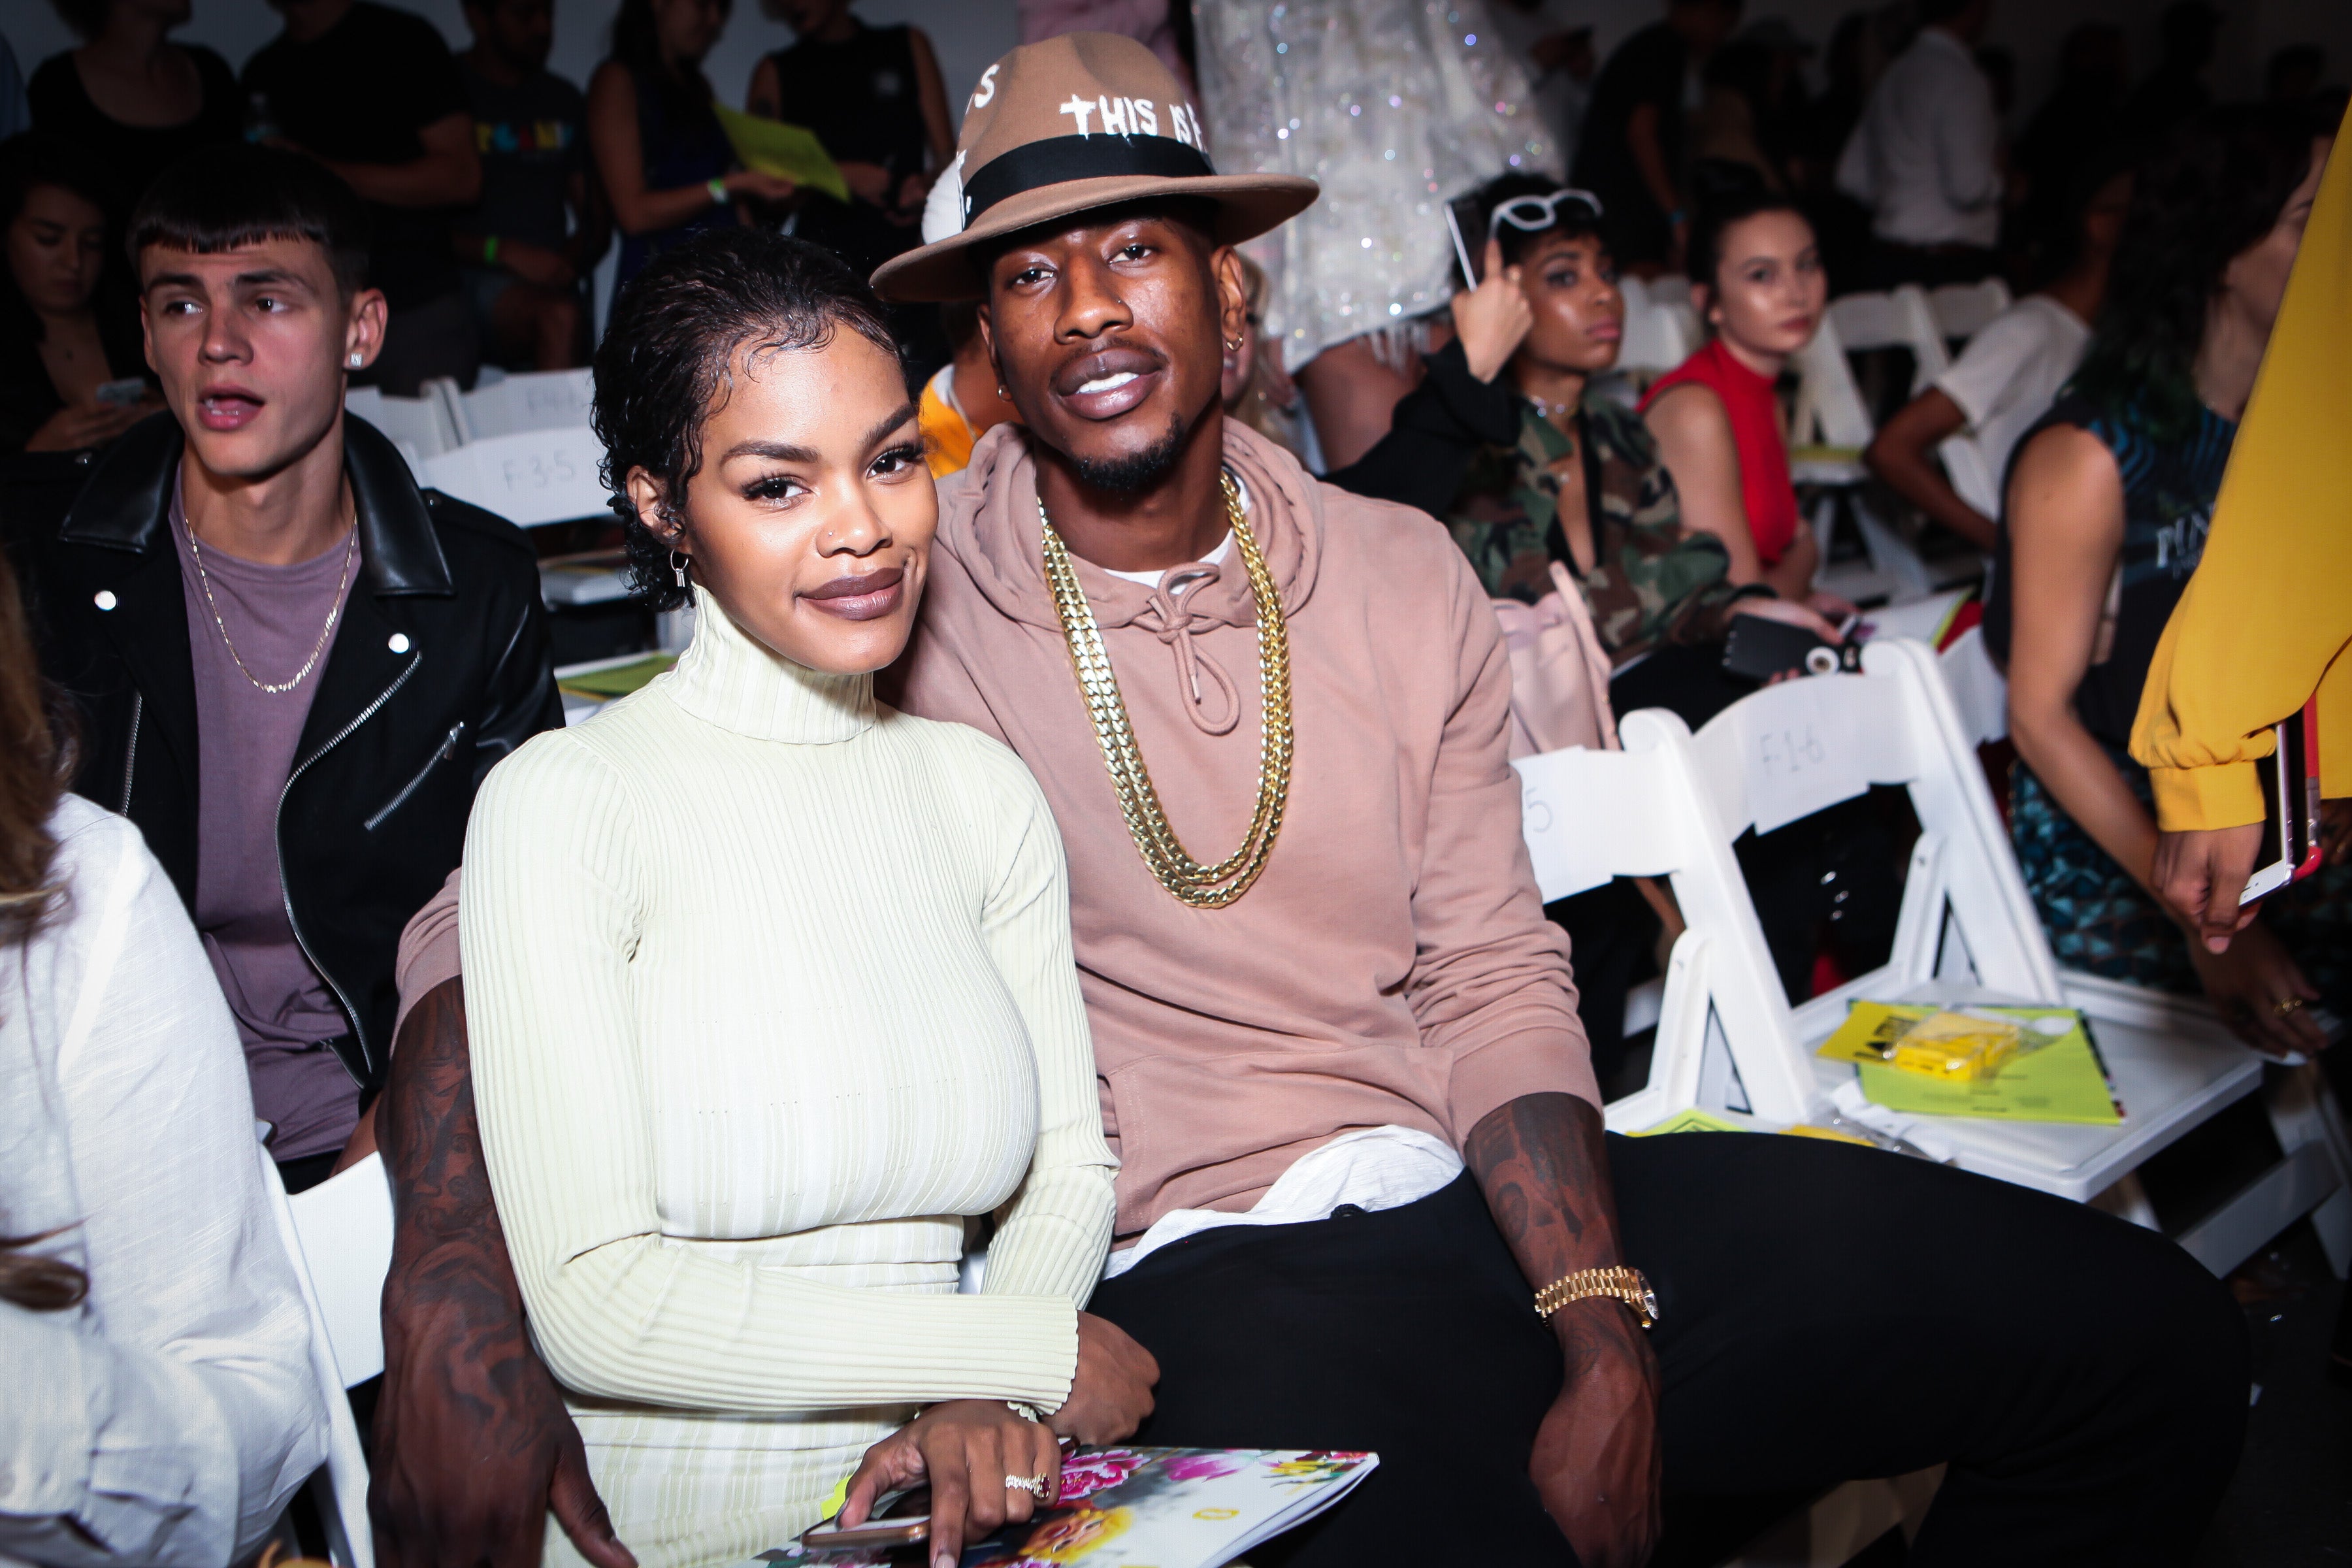 Did Teyana Taylor Just Share A Wedding Photo From Her Big Day With Iman Shumpert?
